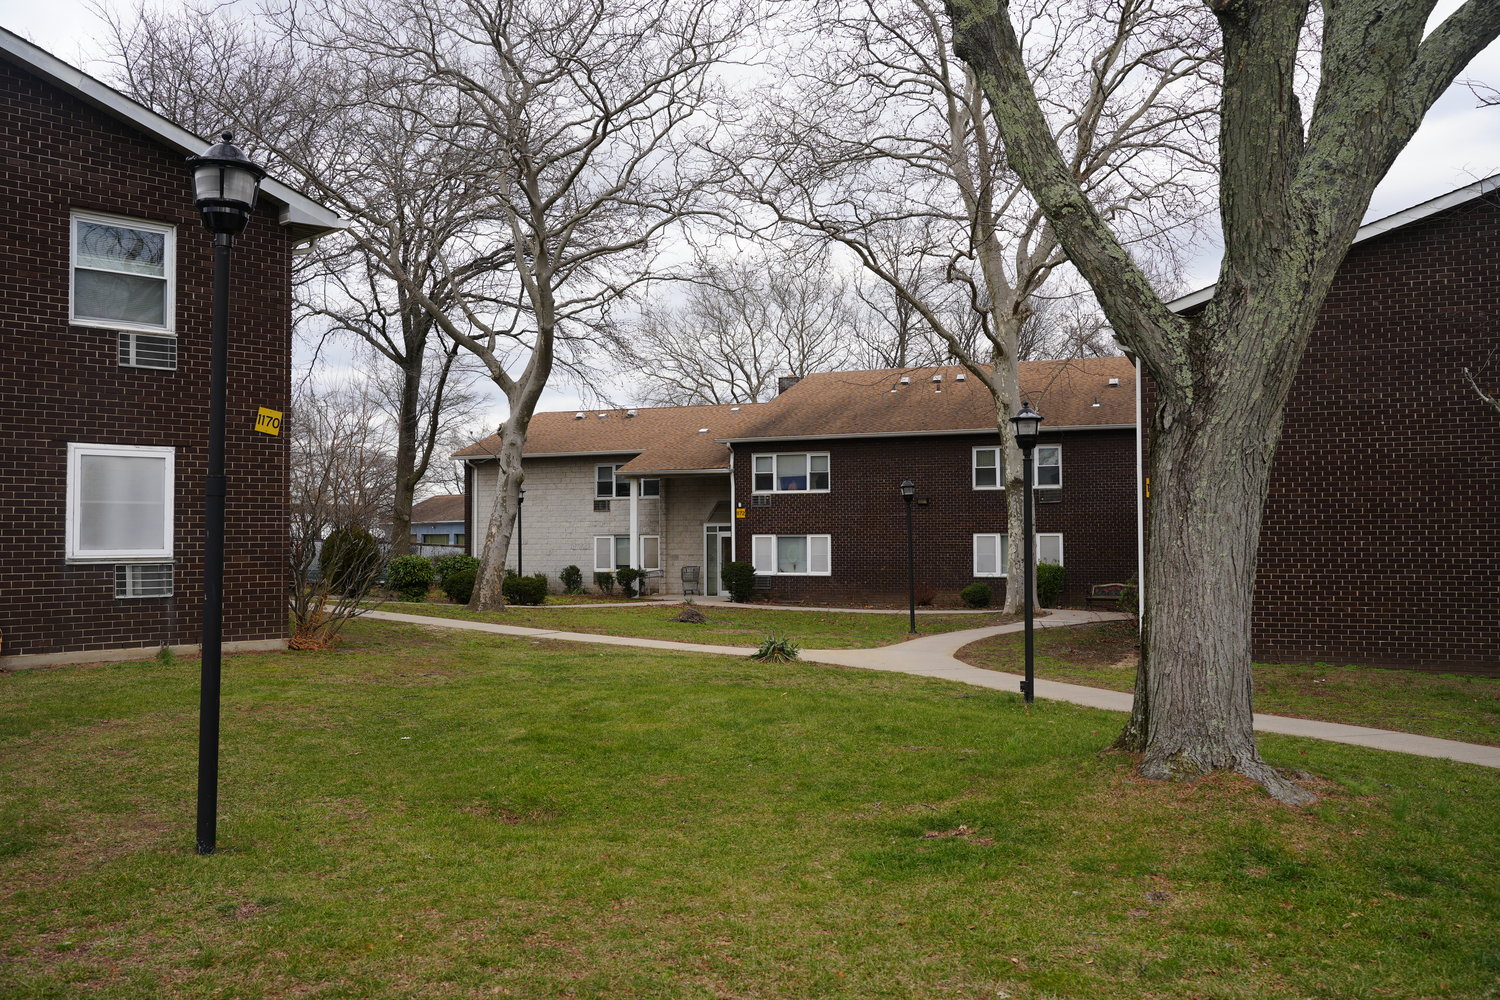 The Dogwood Terrace senior apartment complex, operated by the Town of Hempstead Housing Authority, has not been renovated since it was built in the 1970s. Town officials recently approved a complete overhaul of the apartments.